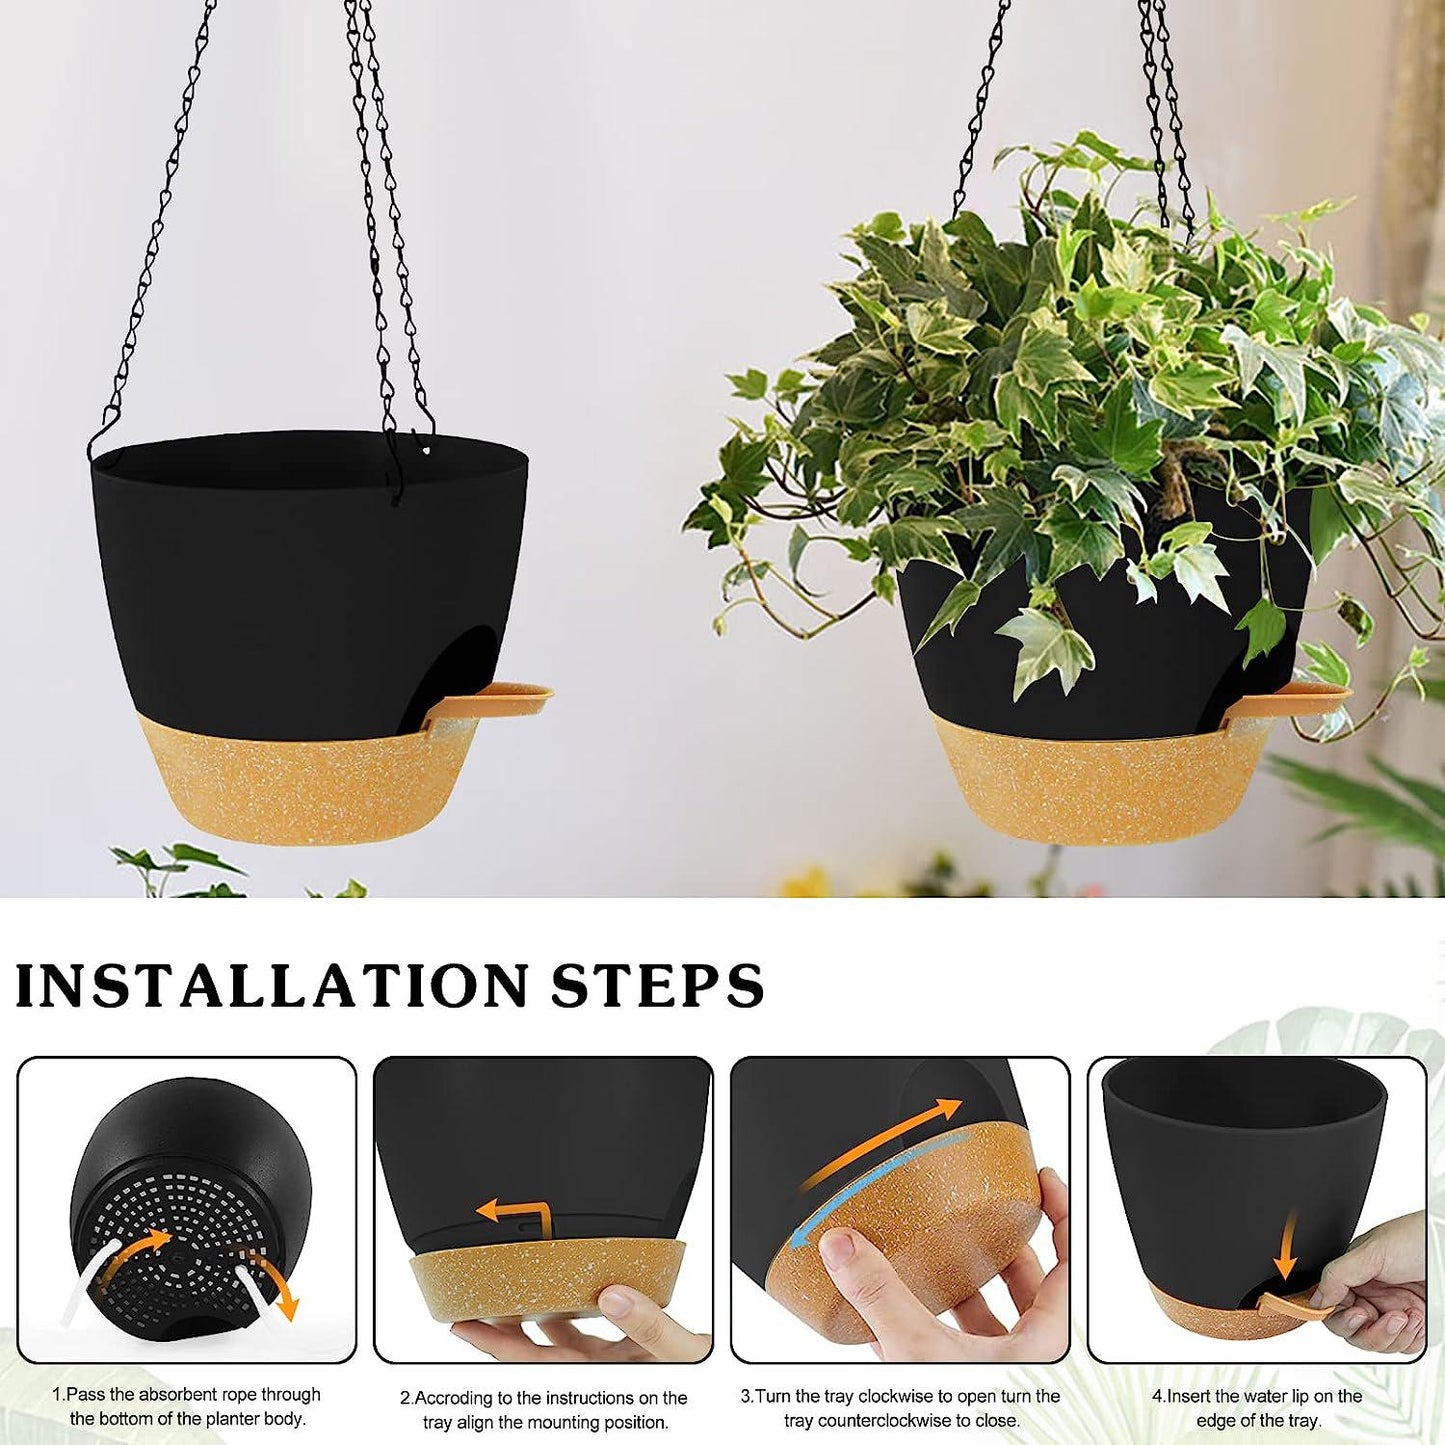 mossFlos 10 Inch Hanging Planters, 2pcs Self Watering Hanging Pots with Drainage Holes, 40oZ Deep Reservior for Indoor Outdoor Hanging Plastic, Hanging Flower Pots for Garden Home (Black)